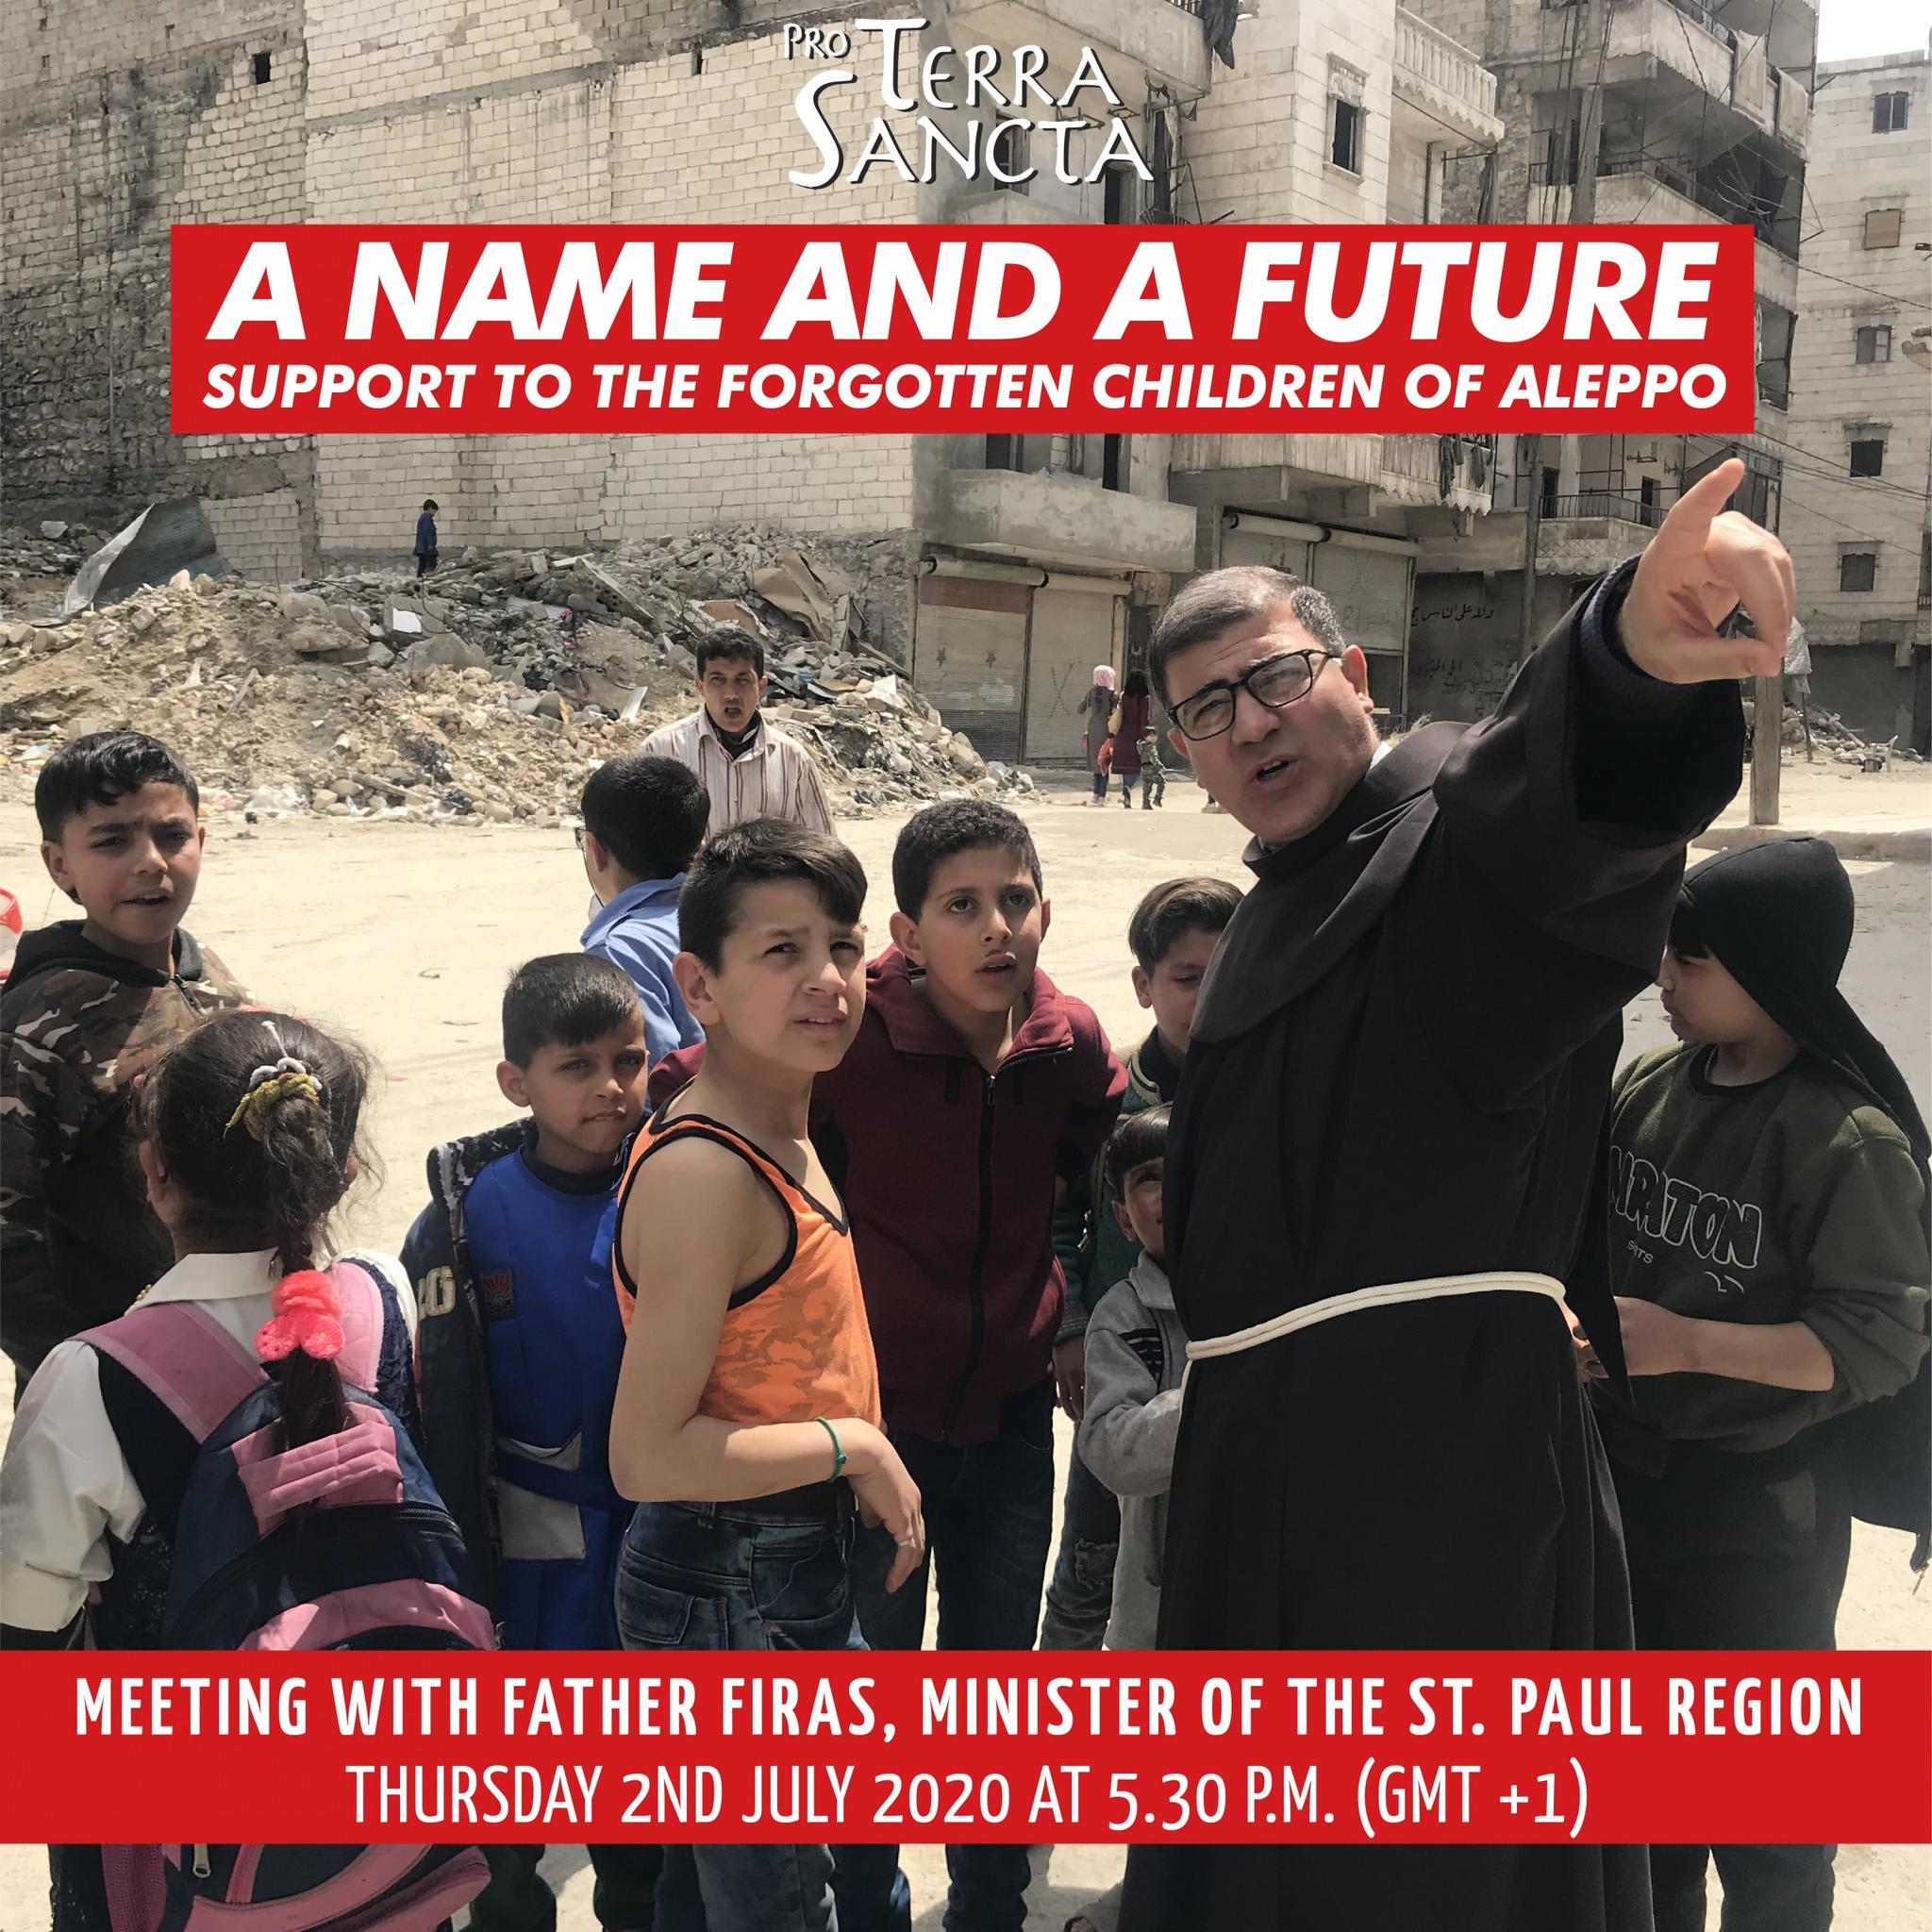 A Name and a Future. Support to the forgotten children of Aleppo